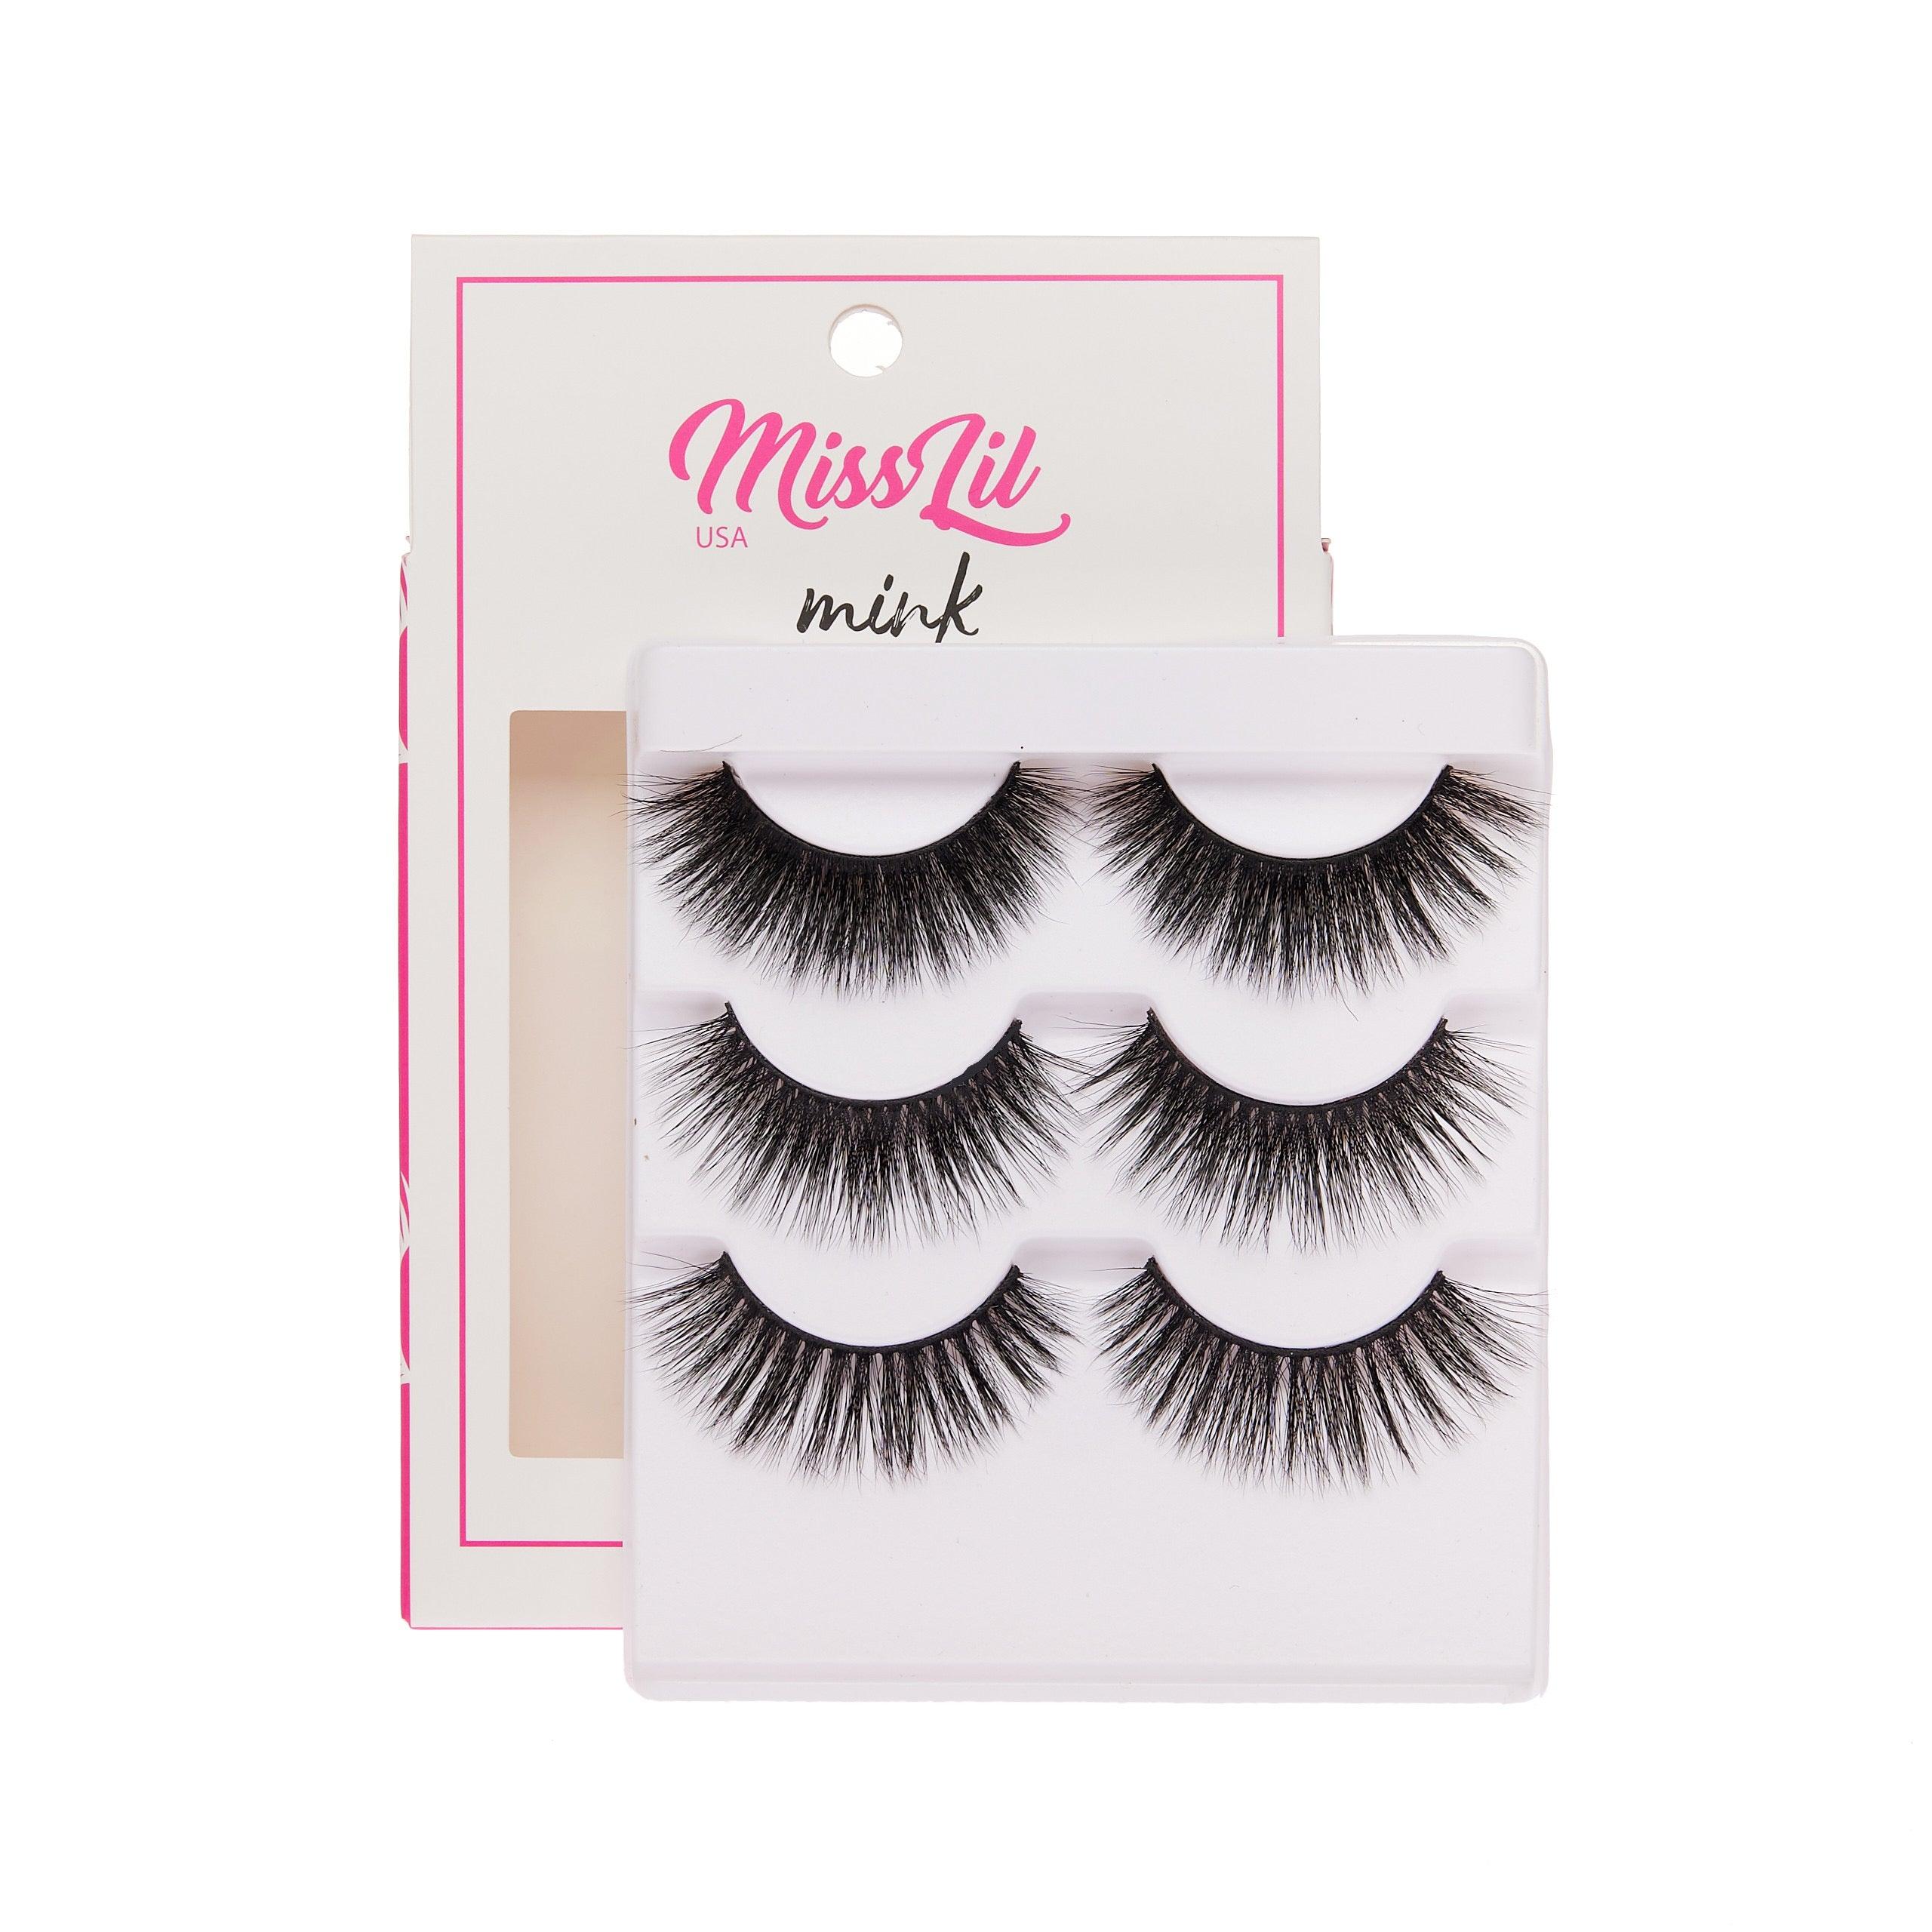 3-Pair Faux Mink Effect Eyelashes - Lash Party Collection #15 - Pack of 3 - Miss Lil USA